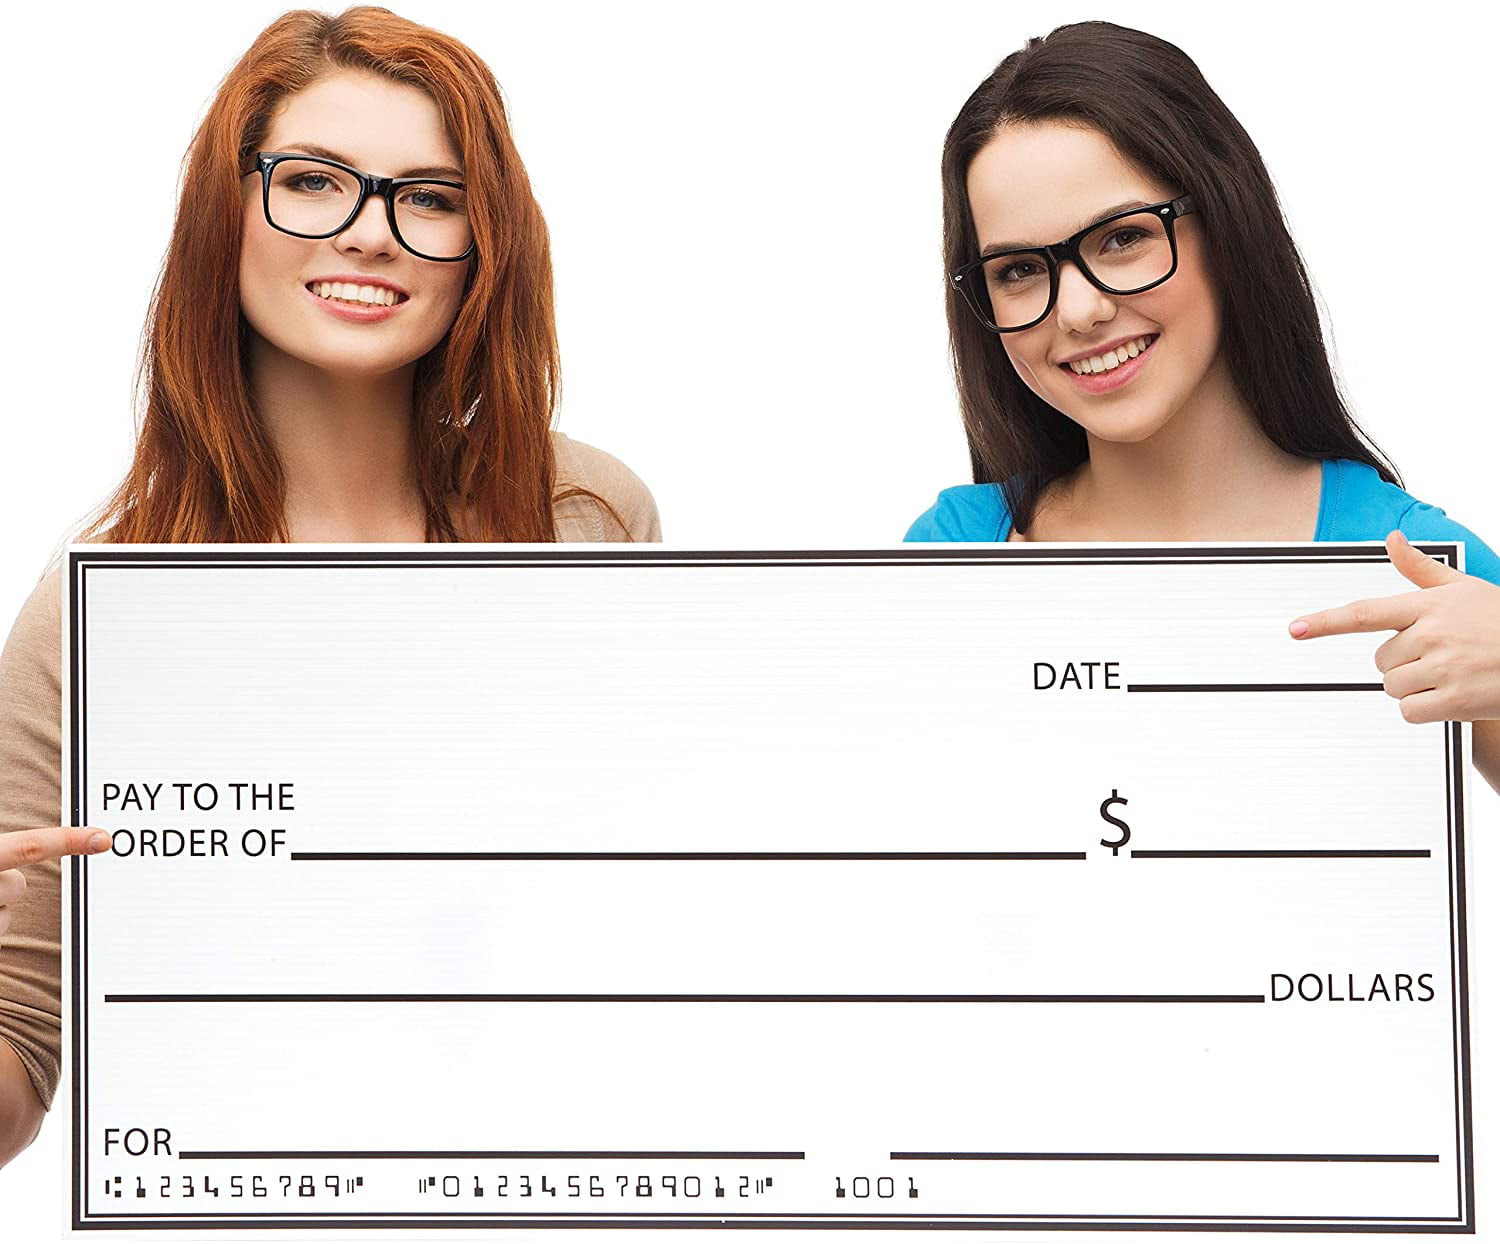 30 x 16 Inches Big Check Large Check Blank Check Giant Big Checks for Presentations Fake Funny Jumbo Presentation Check Realistic for Donation Awards Prizes Fundraisers Charity 4 Pieces 2 Designs 